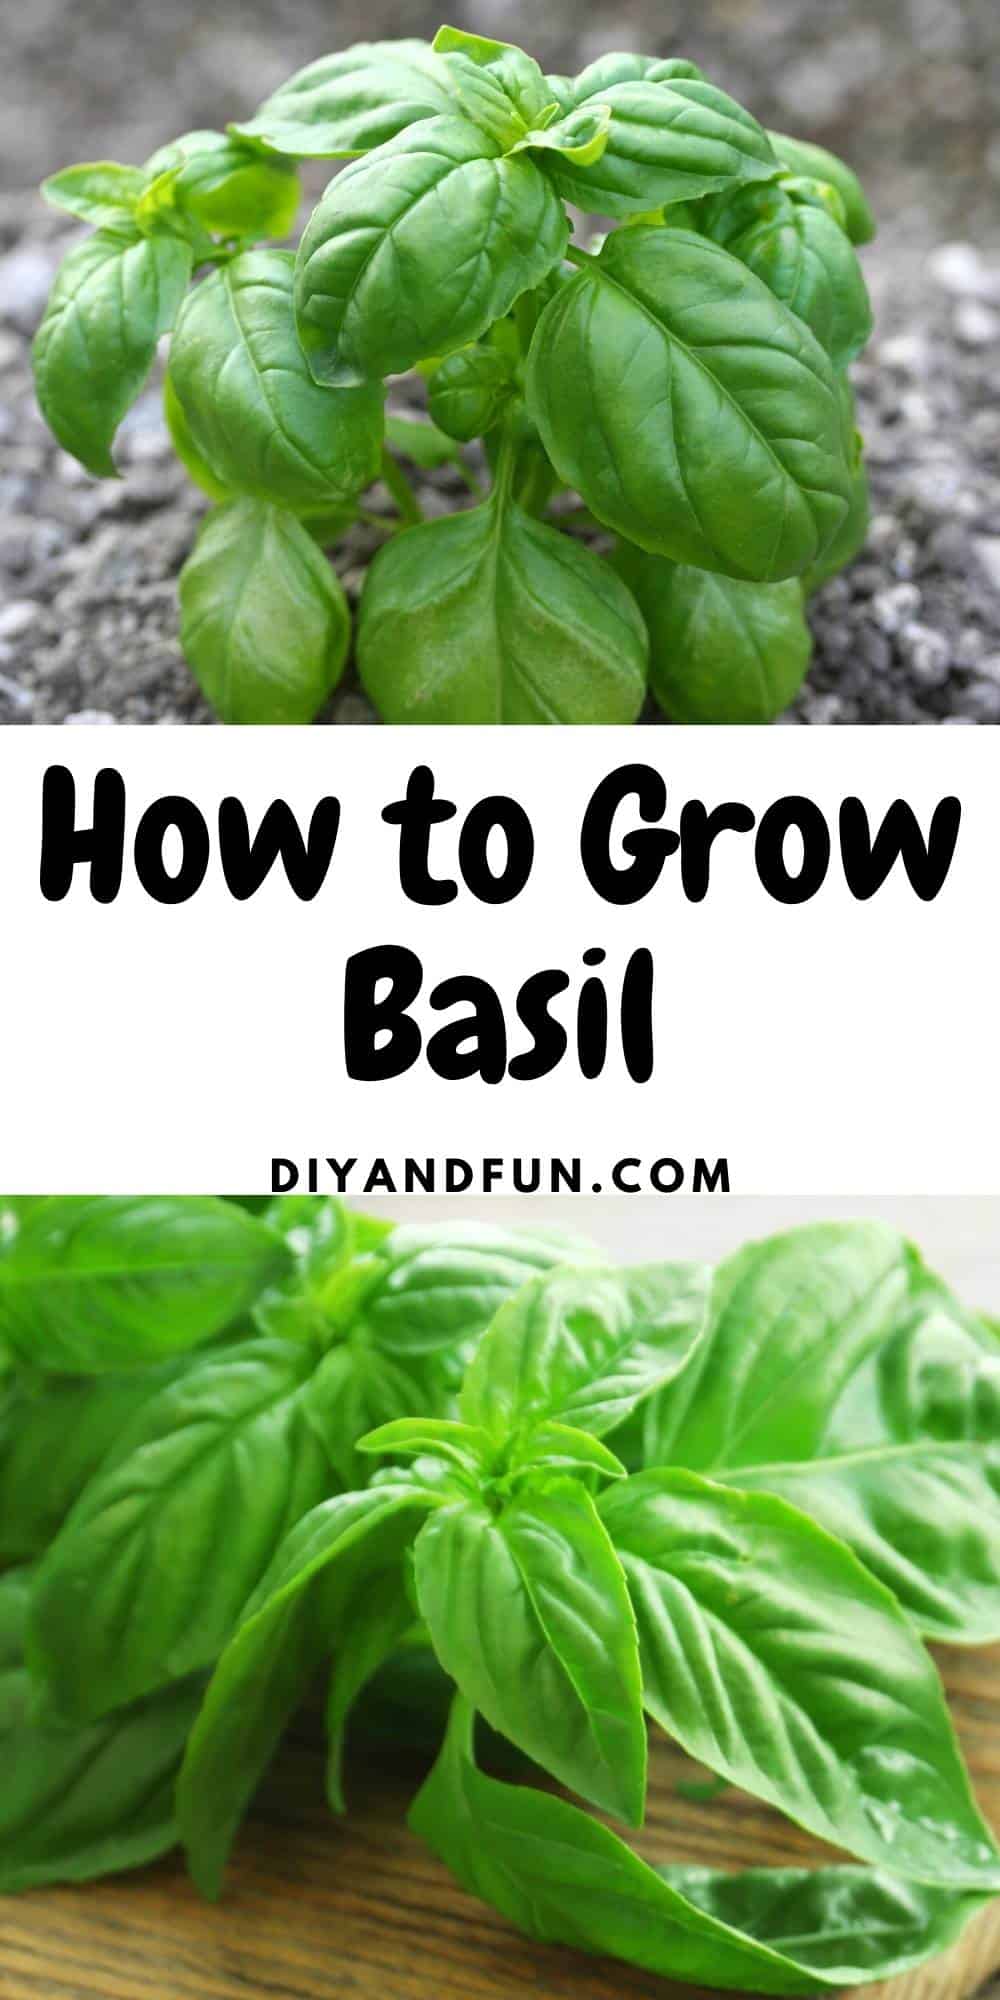 How to Grow Basil, a simple guide for how to plant and grow basil at home as well as some popular uses for the basil.